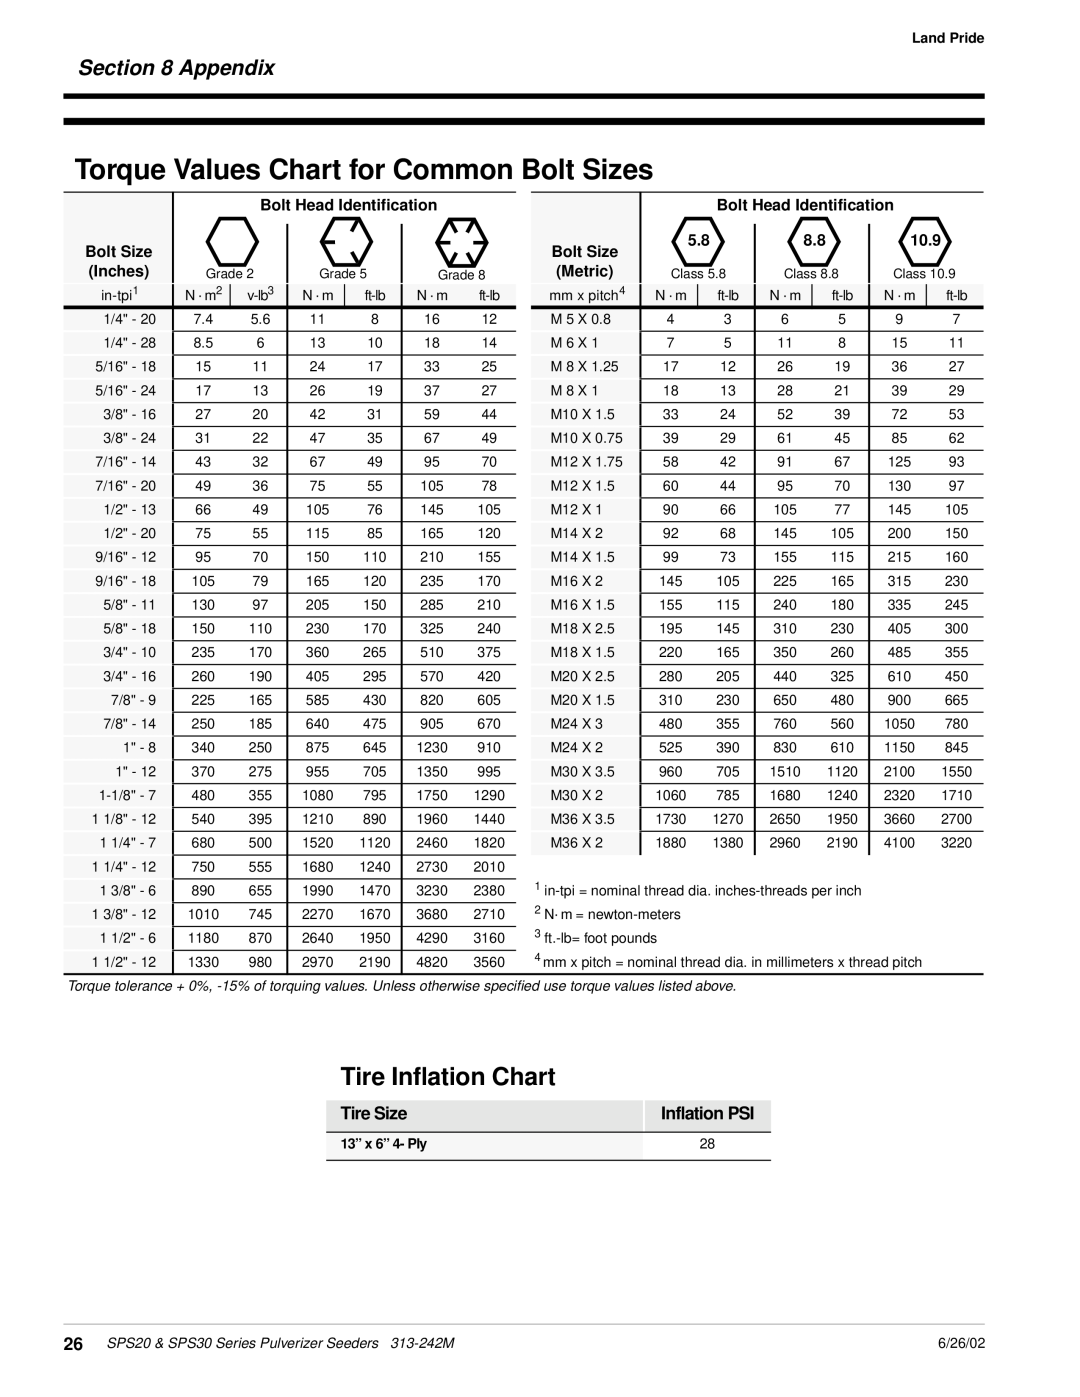 Land Pride SPS20 manual Tire Inflation Chart, Appendix, Tire Size, Inflation PSI, Torque Values Chart for Common Bolt Sizes 